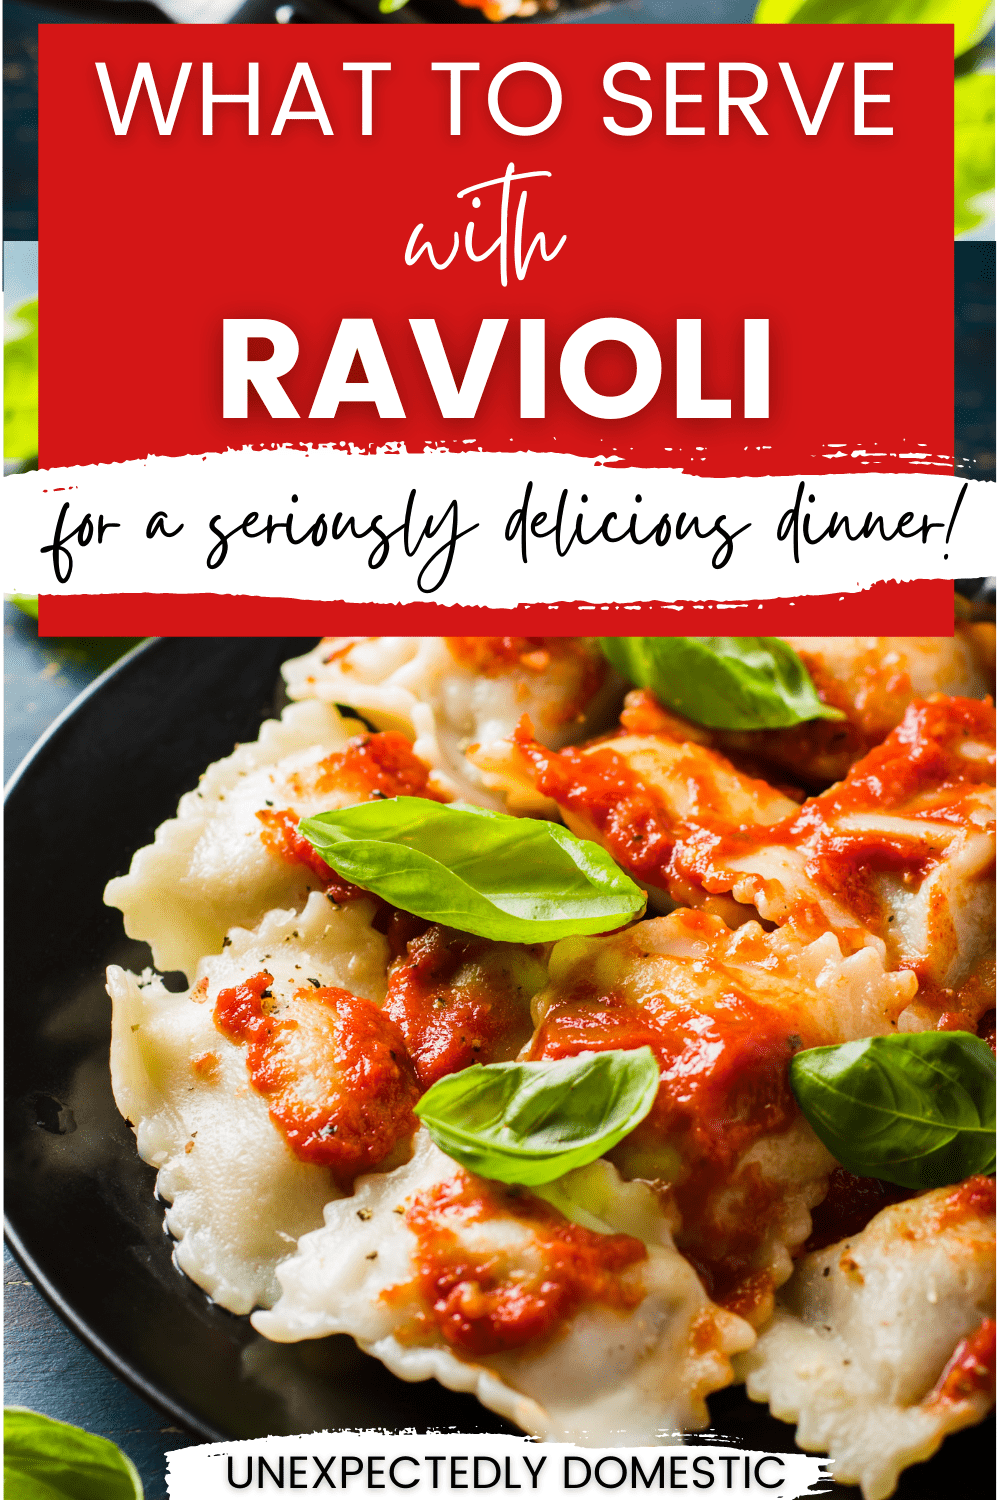 The BEST side dishes for ravioli! Here’s exactly what to serve with ravioli to create a totally delicious dinner.